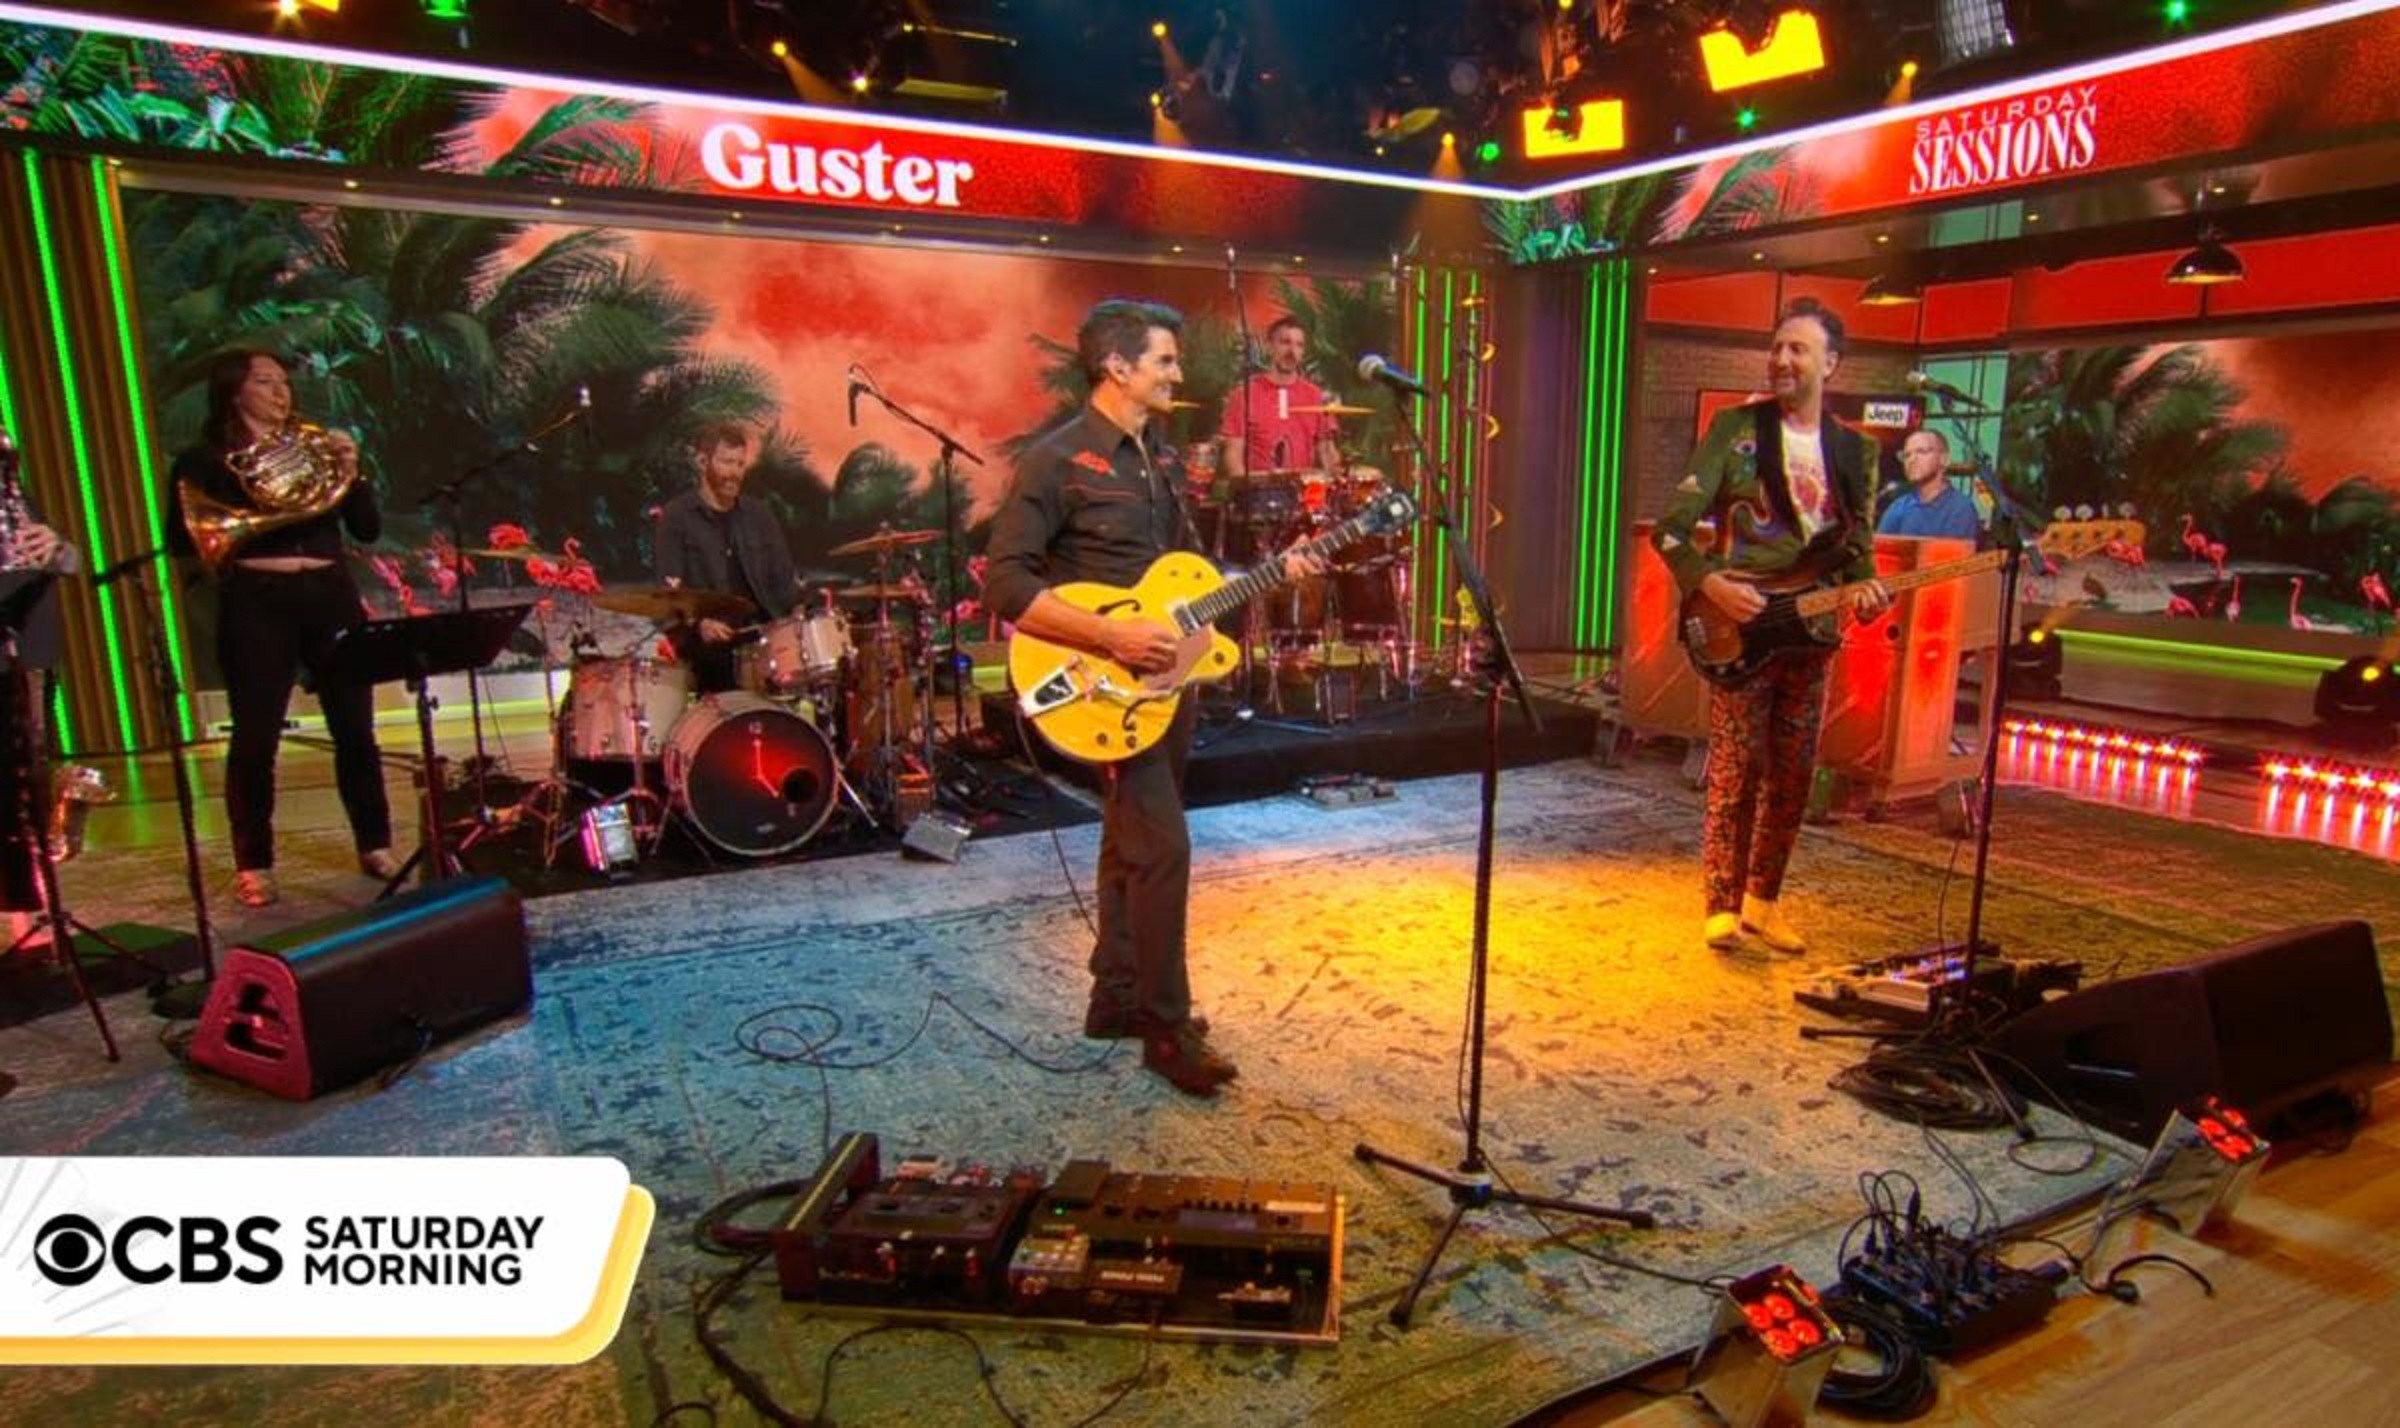 Guster Perform and Give Exclusive Interview on "CBS Saturday Morning"